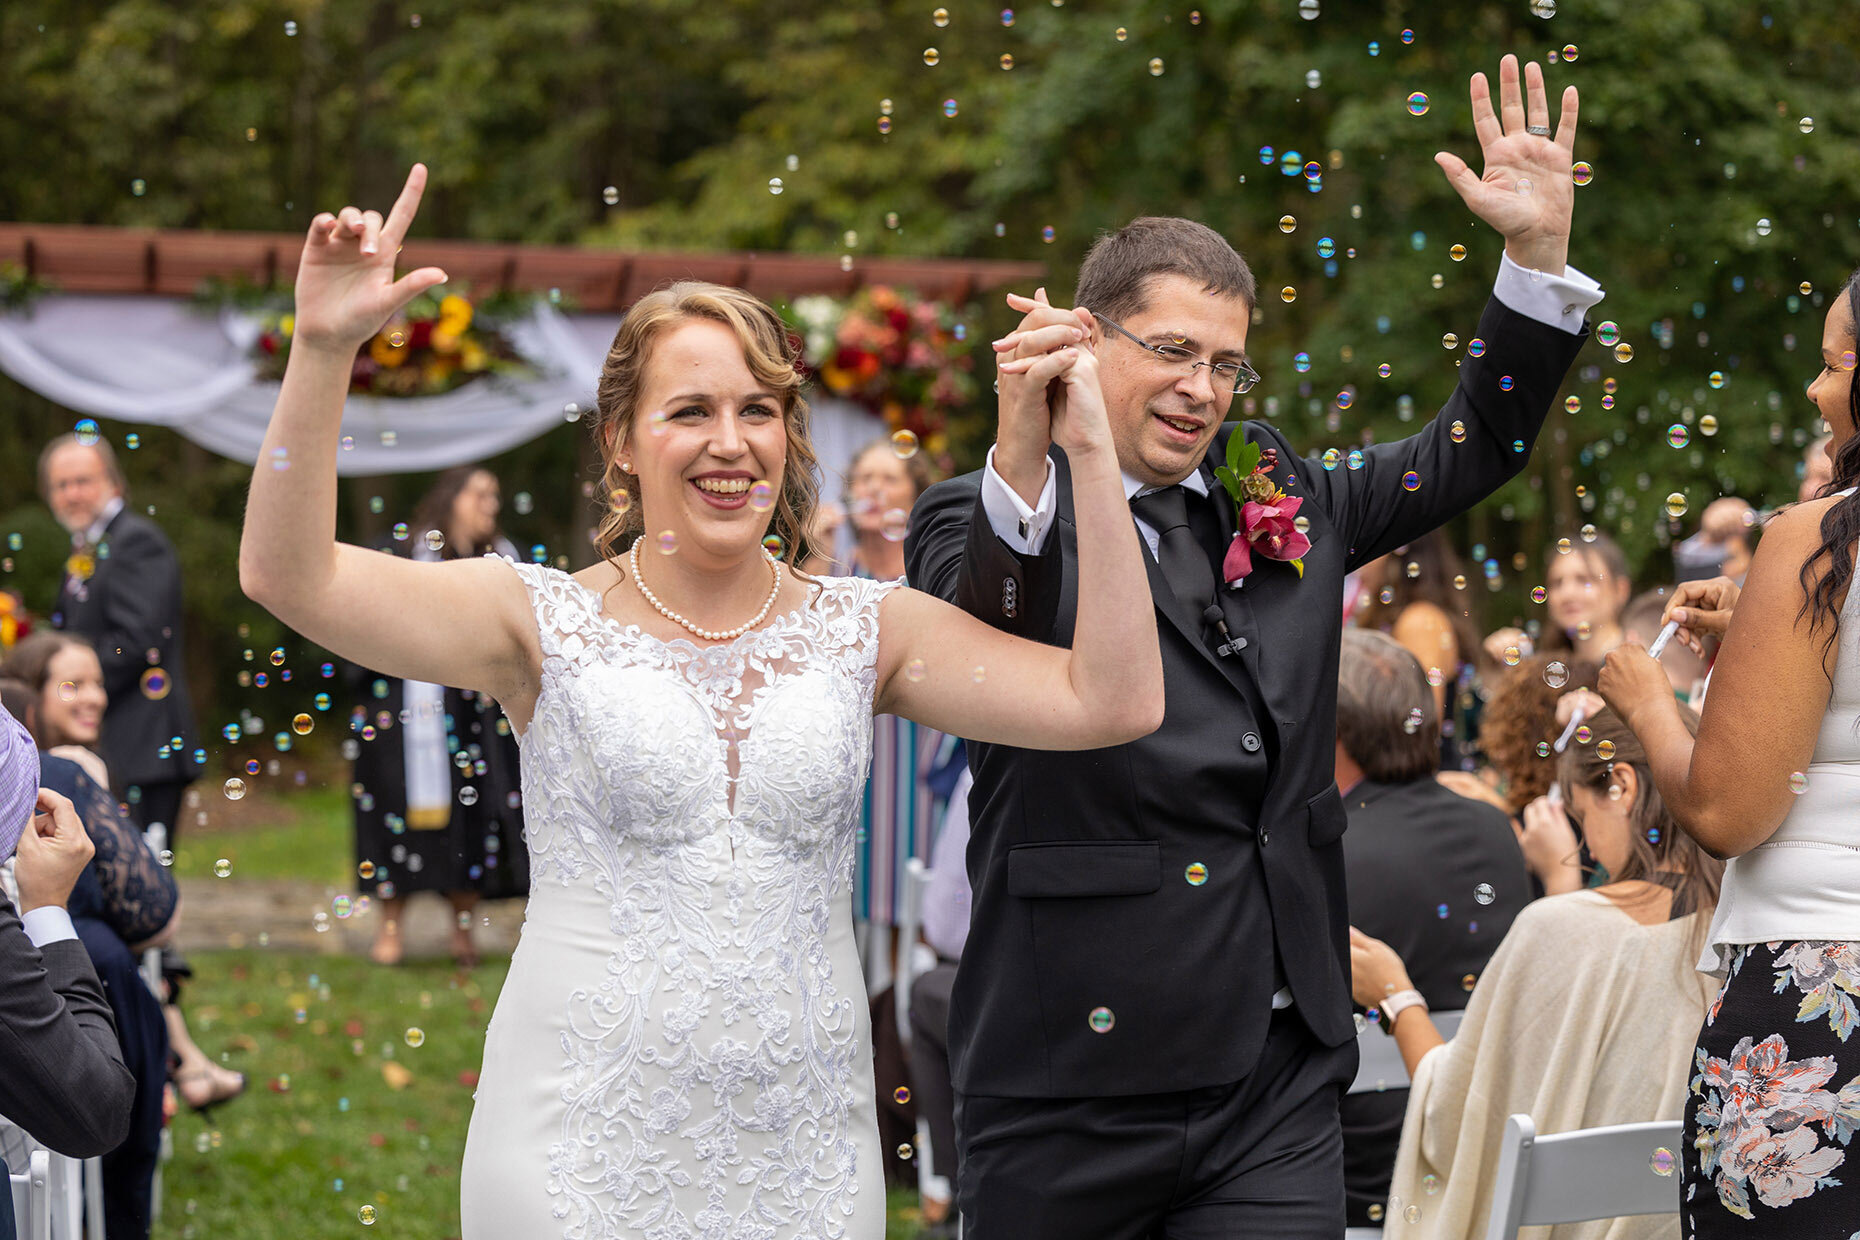 Bubble exit at recessional wedding ceremony